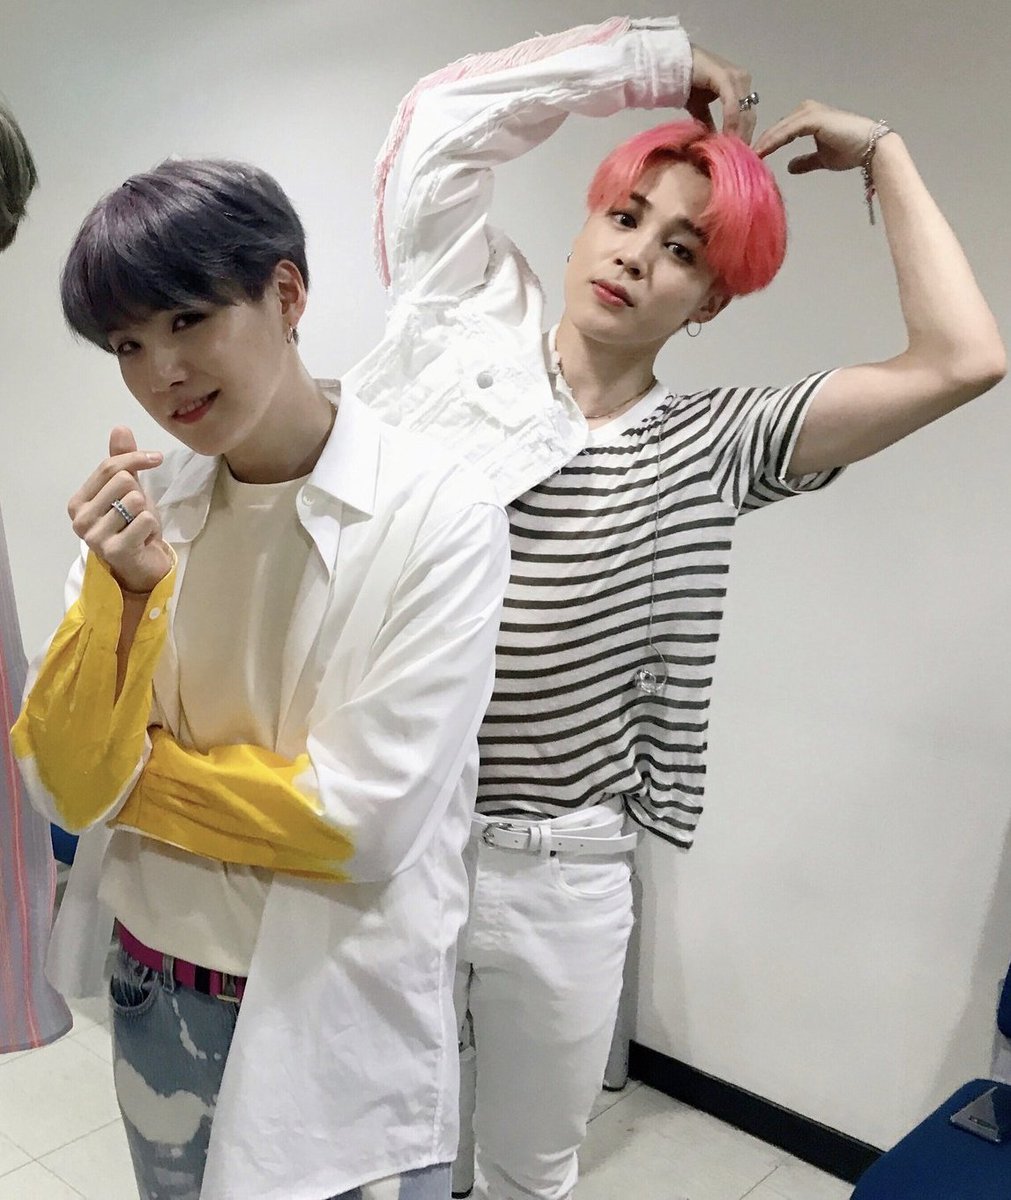 First we get, then we get now we get!! YOONMINERS STAY WINNING   #yoonmin